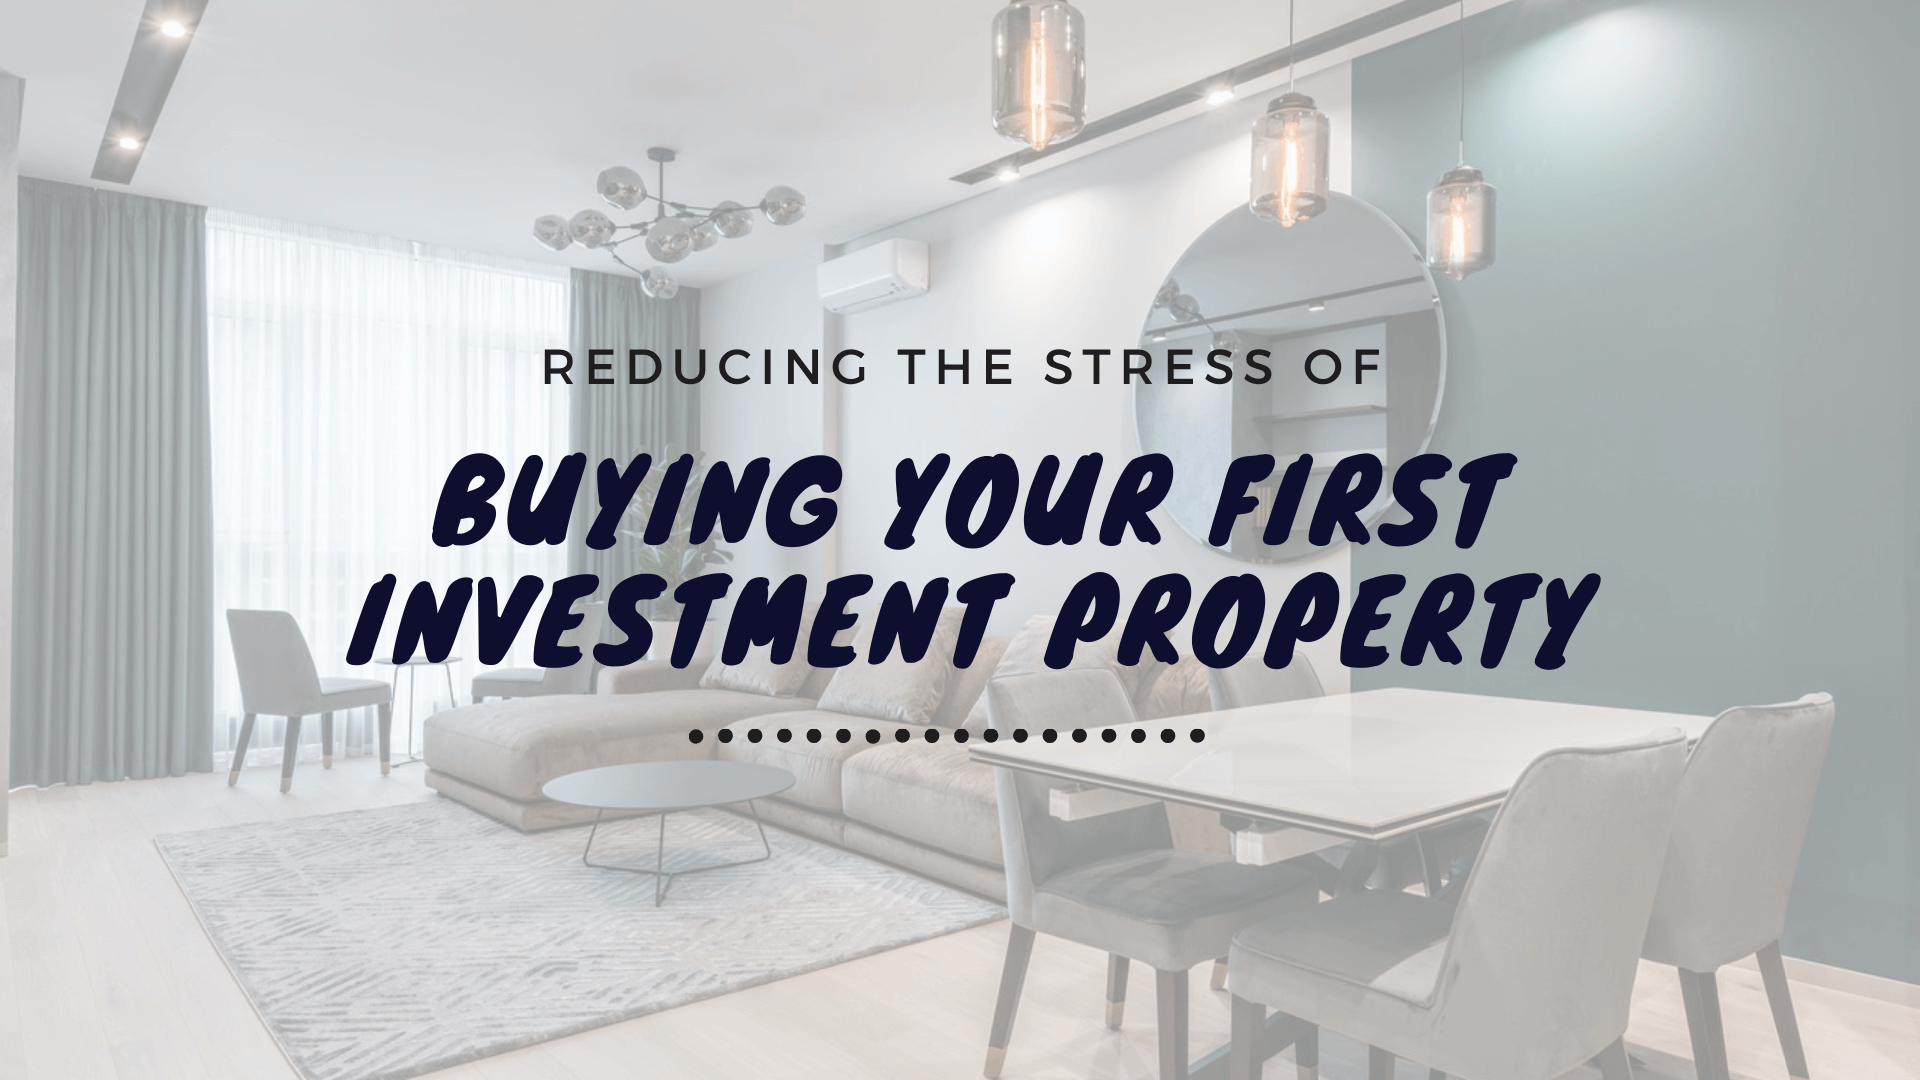 How to Reduce the Stress of Buying your First LA County Investment Property